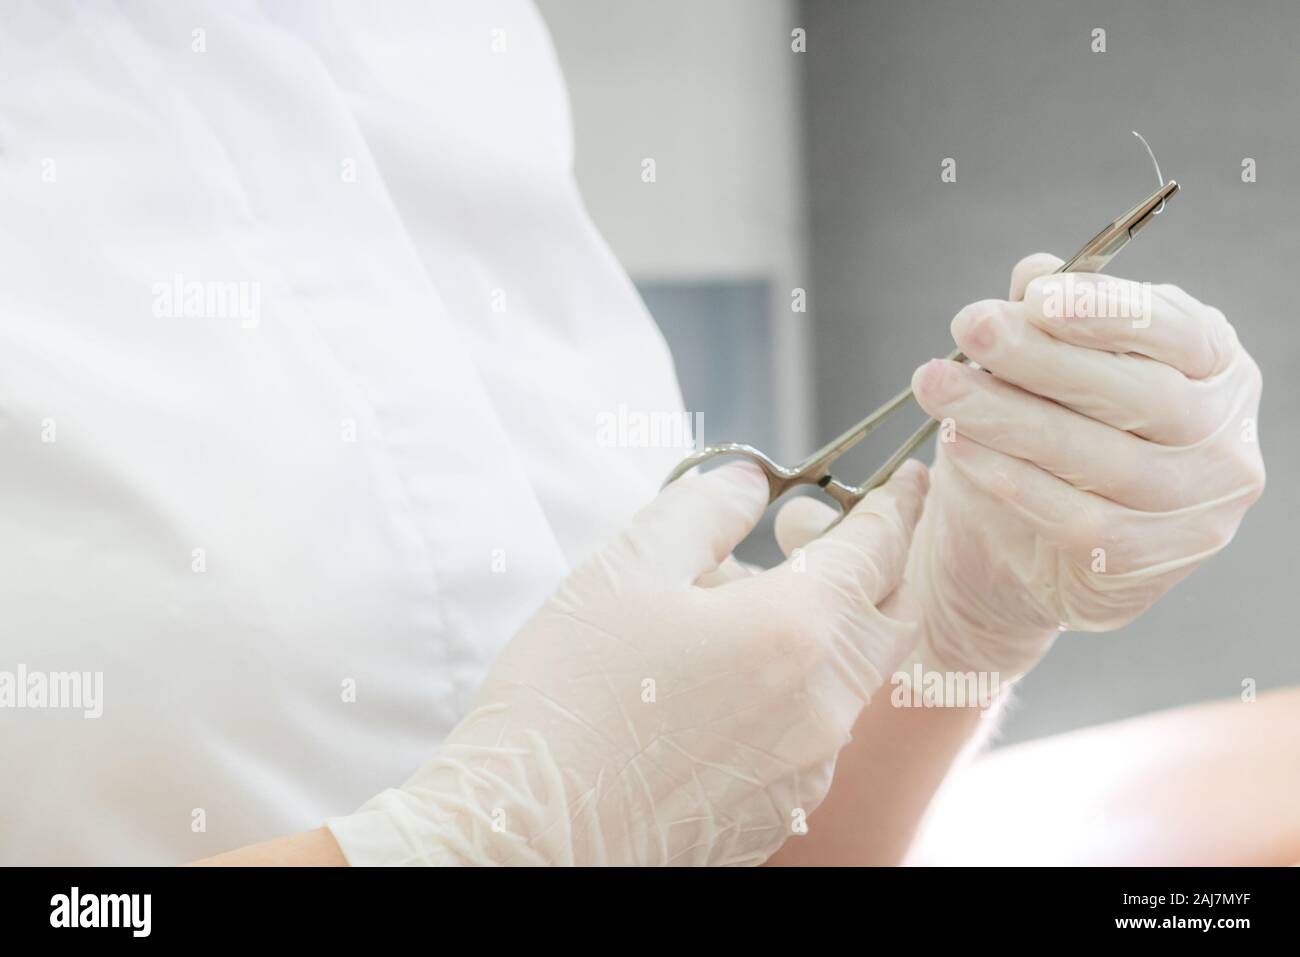 doctor with surgical forceps holding a suture needle Stock Photo